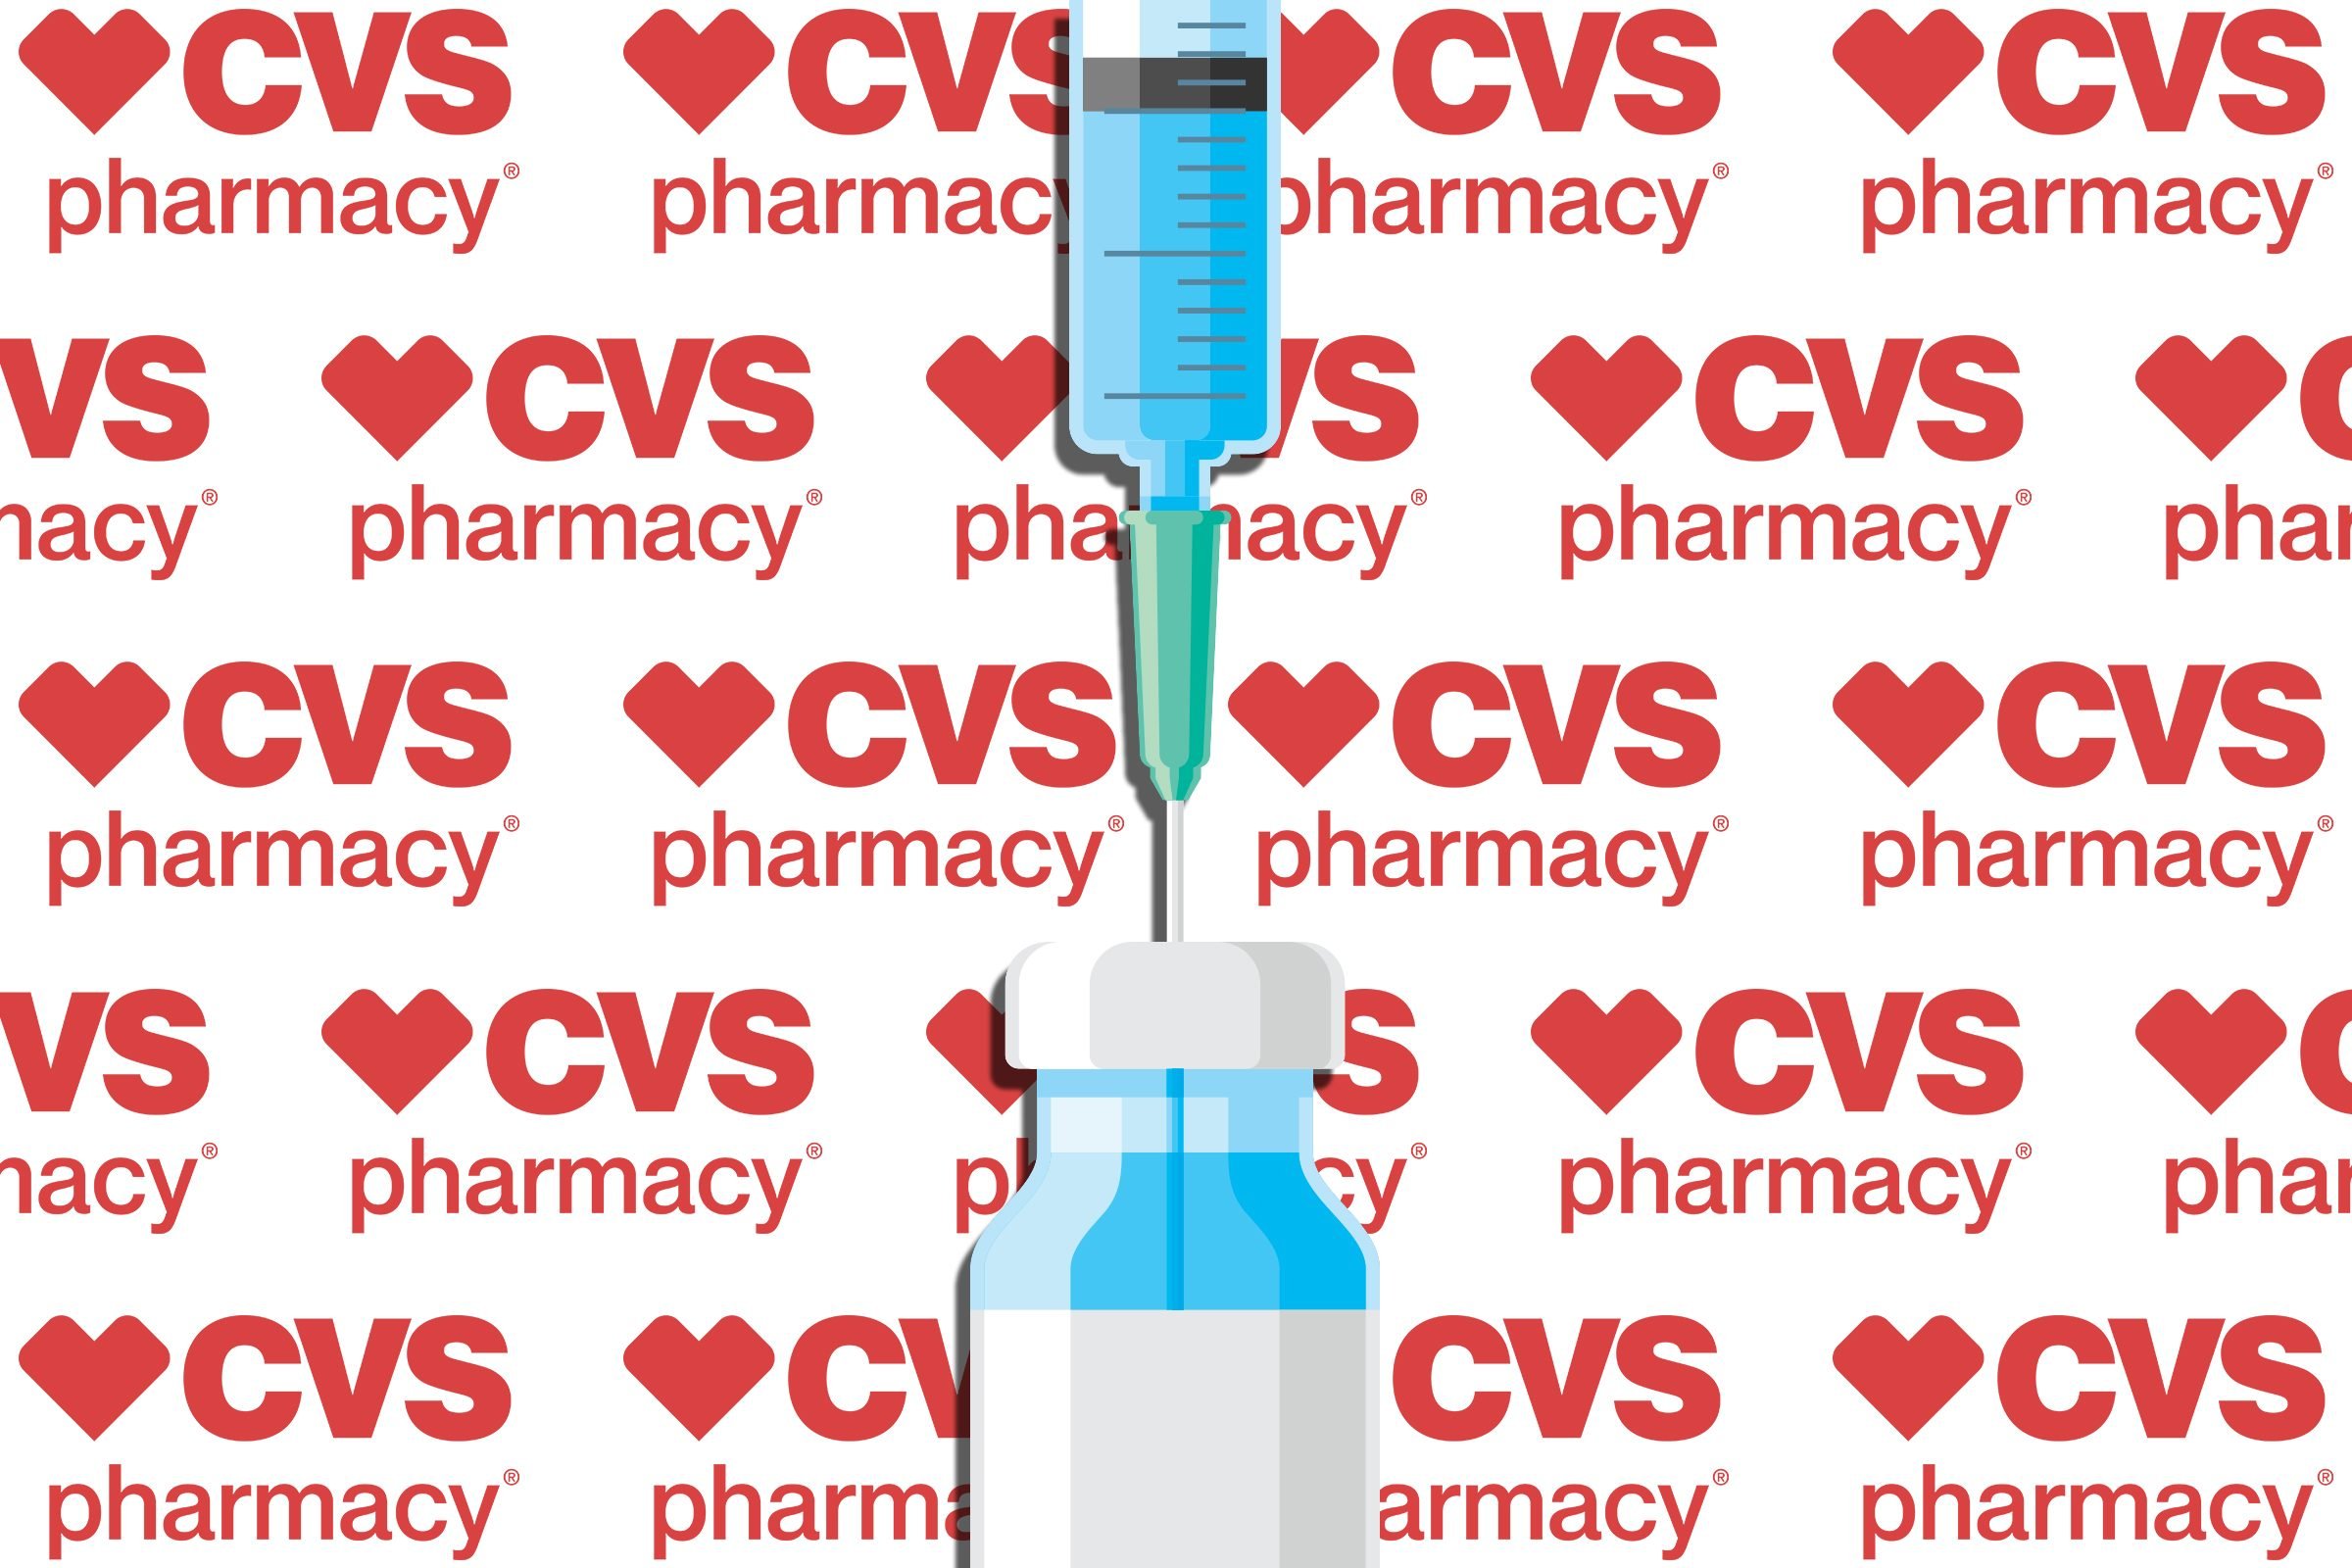 How to Get a Flu Shot at CVS The Cost, Benefits and Risks The Healthy